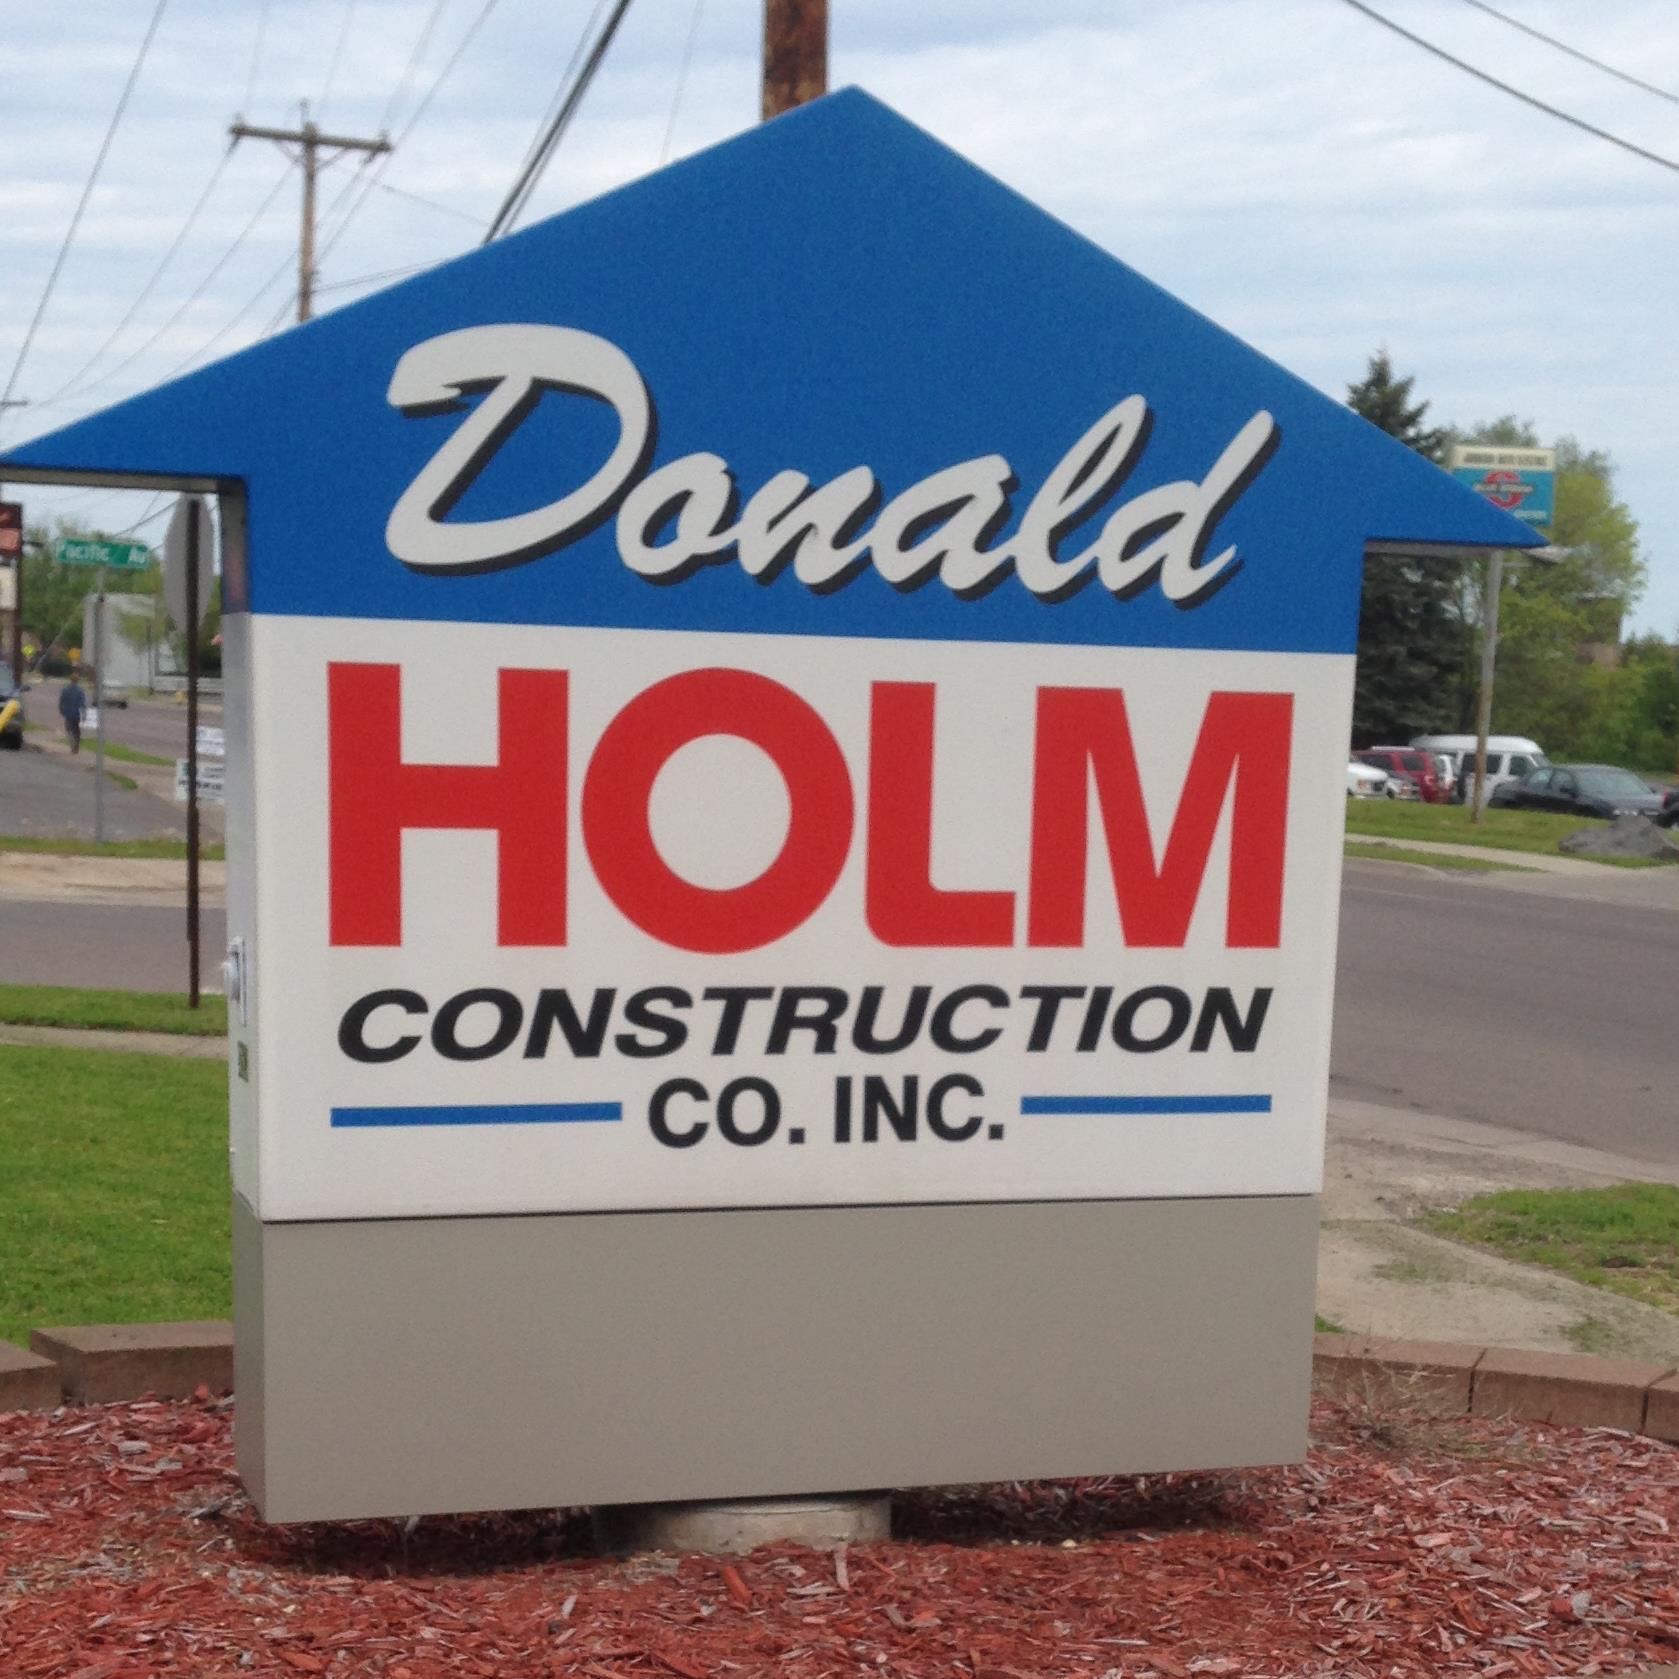 Local Commercial General Contractor Serving Duluth since 1954. Call Now for free estimates 218-628-2257